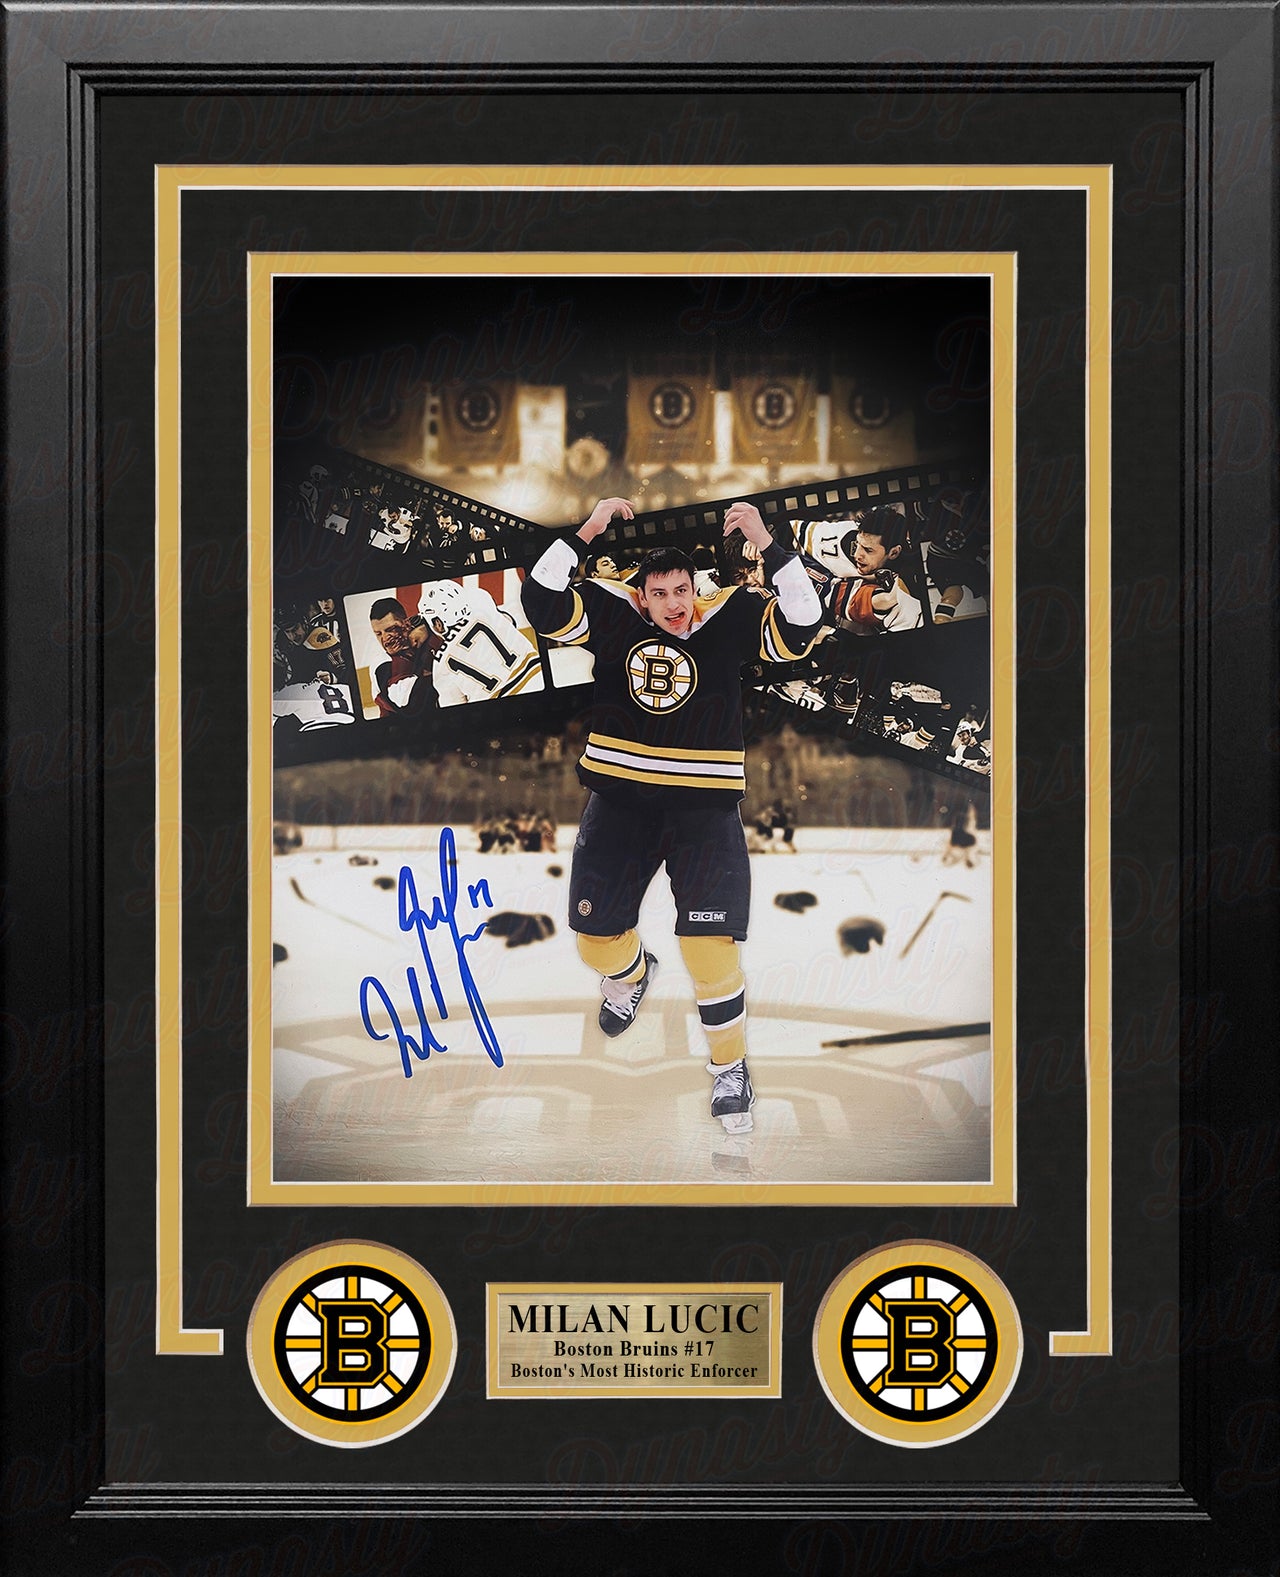 Milan Lucic Fight Collage Boston Bruins Autographed 8" x 10" Framed Hockey Photo